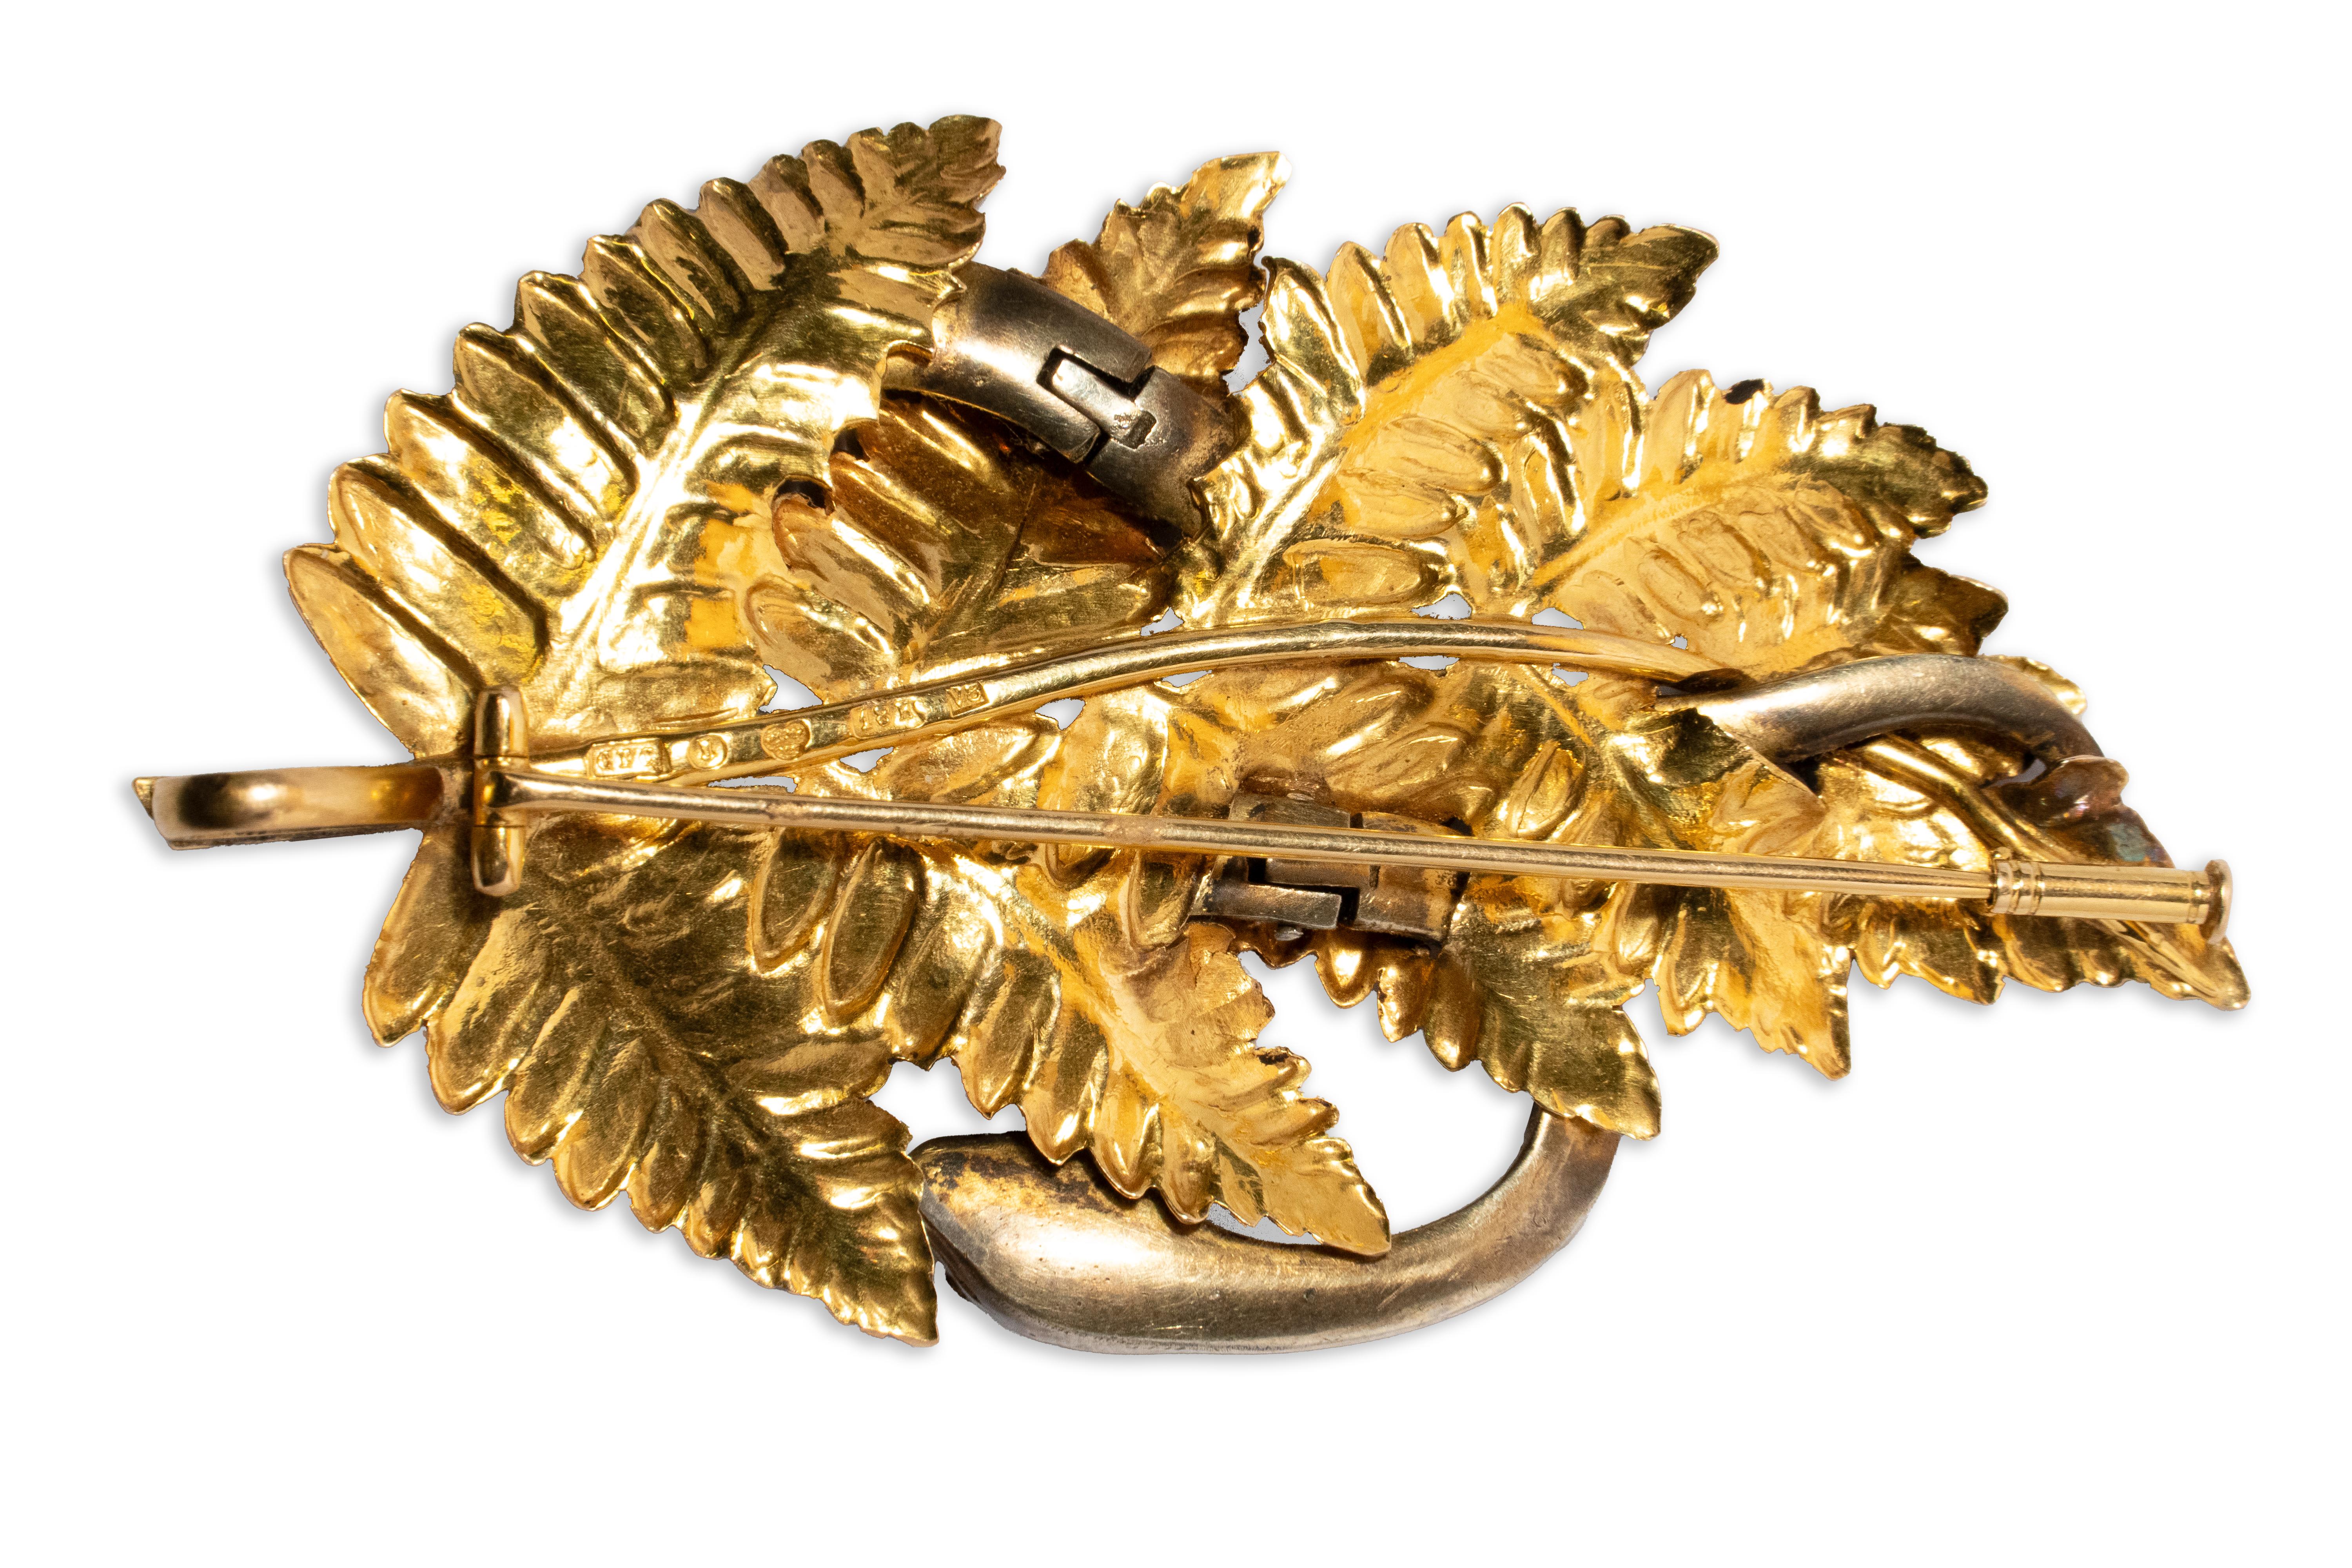 Capture the allure of 1940's elegance with this exquisite Snake in Fern Brooch/Pendant crafted in 18k gold by renowned Swedish court jeweler C.F. Carlman in 1947. Embracing the allure of nature, this piece features a captivating snake entwined